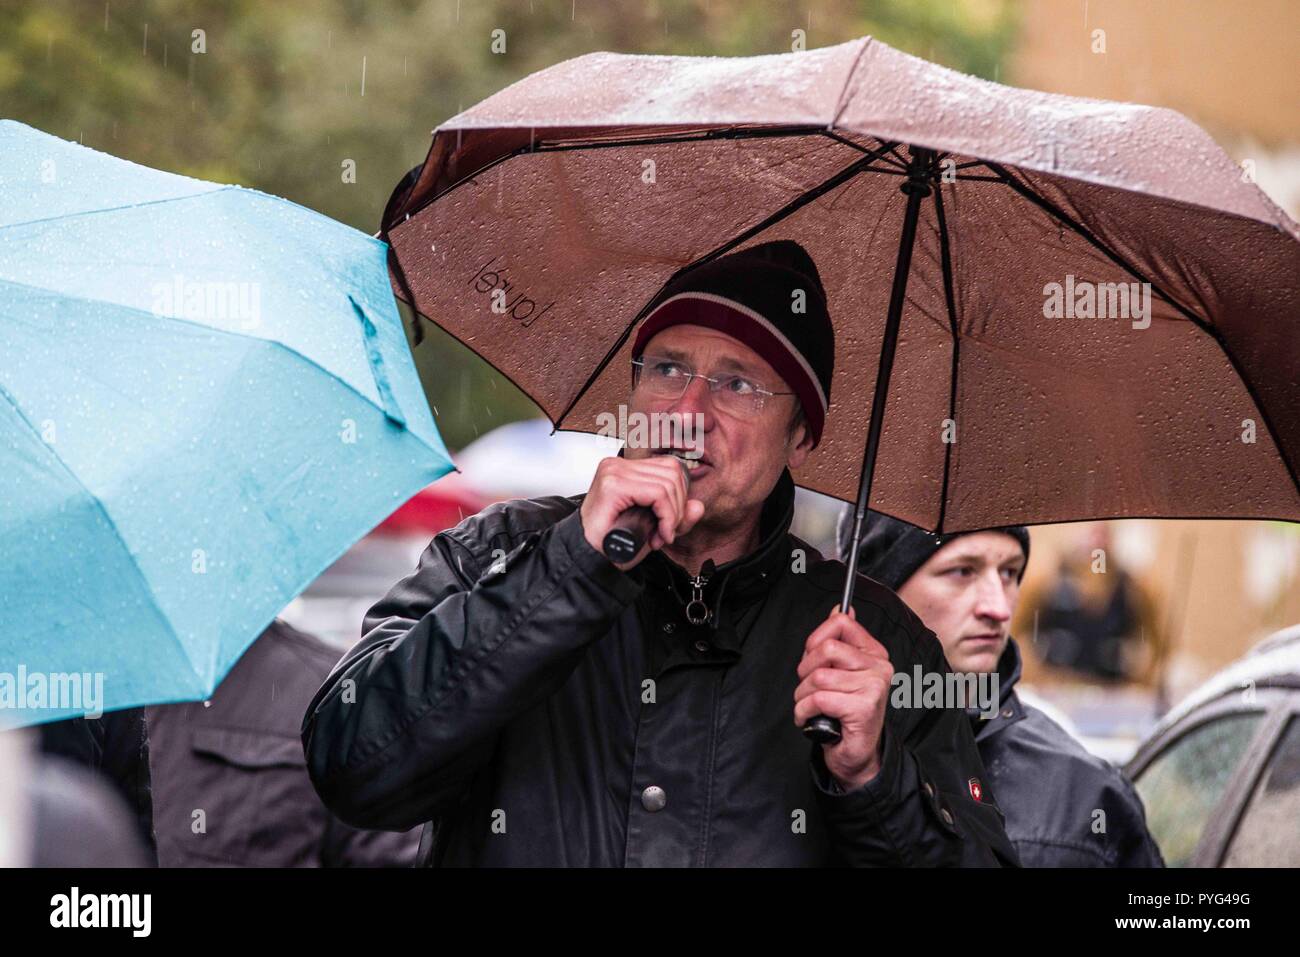 Munich, Bavaria, Germany. 27th Oct, 2018. Islamophobe MICHAEL STUERZENBERGER (StÃ¼rzenberger) leading Pegida Dresden in Munich. Attempting to draw more followers and expand PEGIDA into Bavaria, 'Pegida Dresden'' announced an appearance by founders LUTZ BACHMANN and SIEGFRIED DAEBRITZ in Munich's Neuhausen district. Ultimately, the two did not arrive, leaving approximately 40 Pegida followers to march against over 450 counter-demonstrators. Pegida Dresden in Munich is actually Pegida Nuremburg who is attempting to expand south to Munich where the rival Pegida Muenchen is already acti Stock Photo